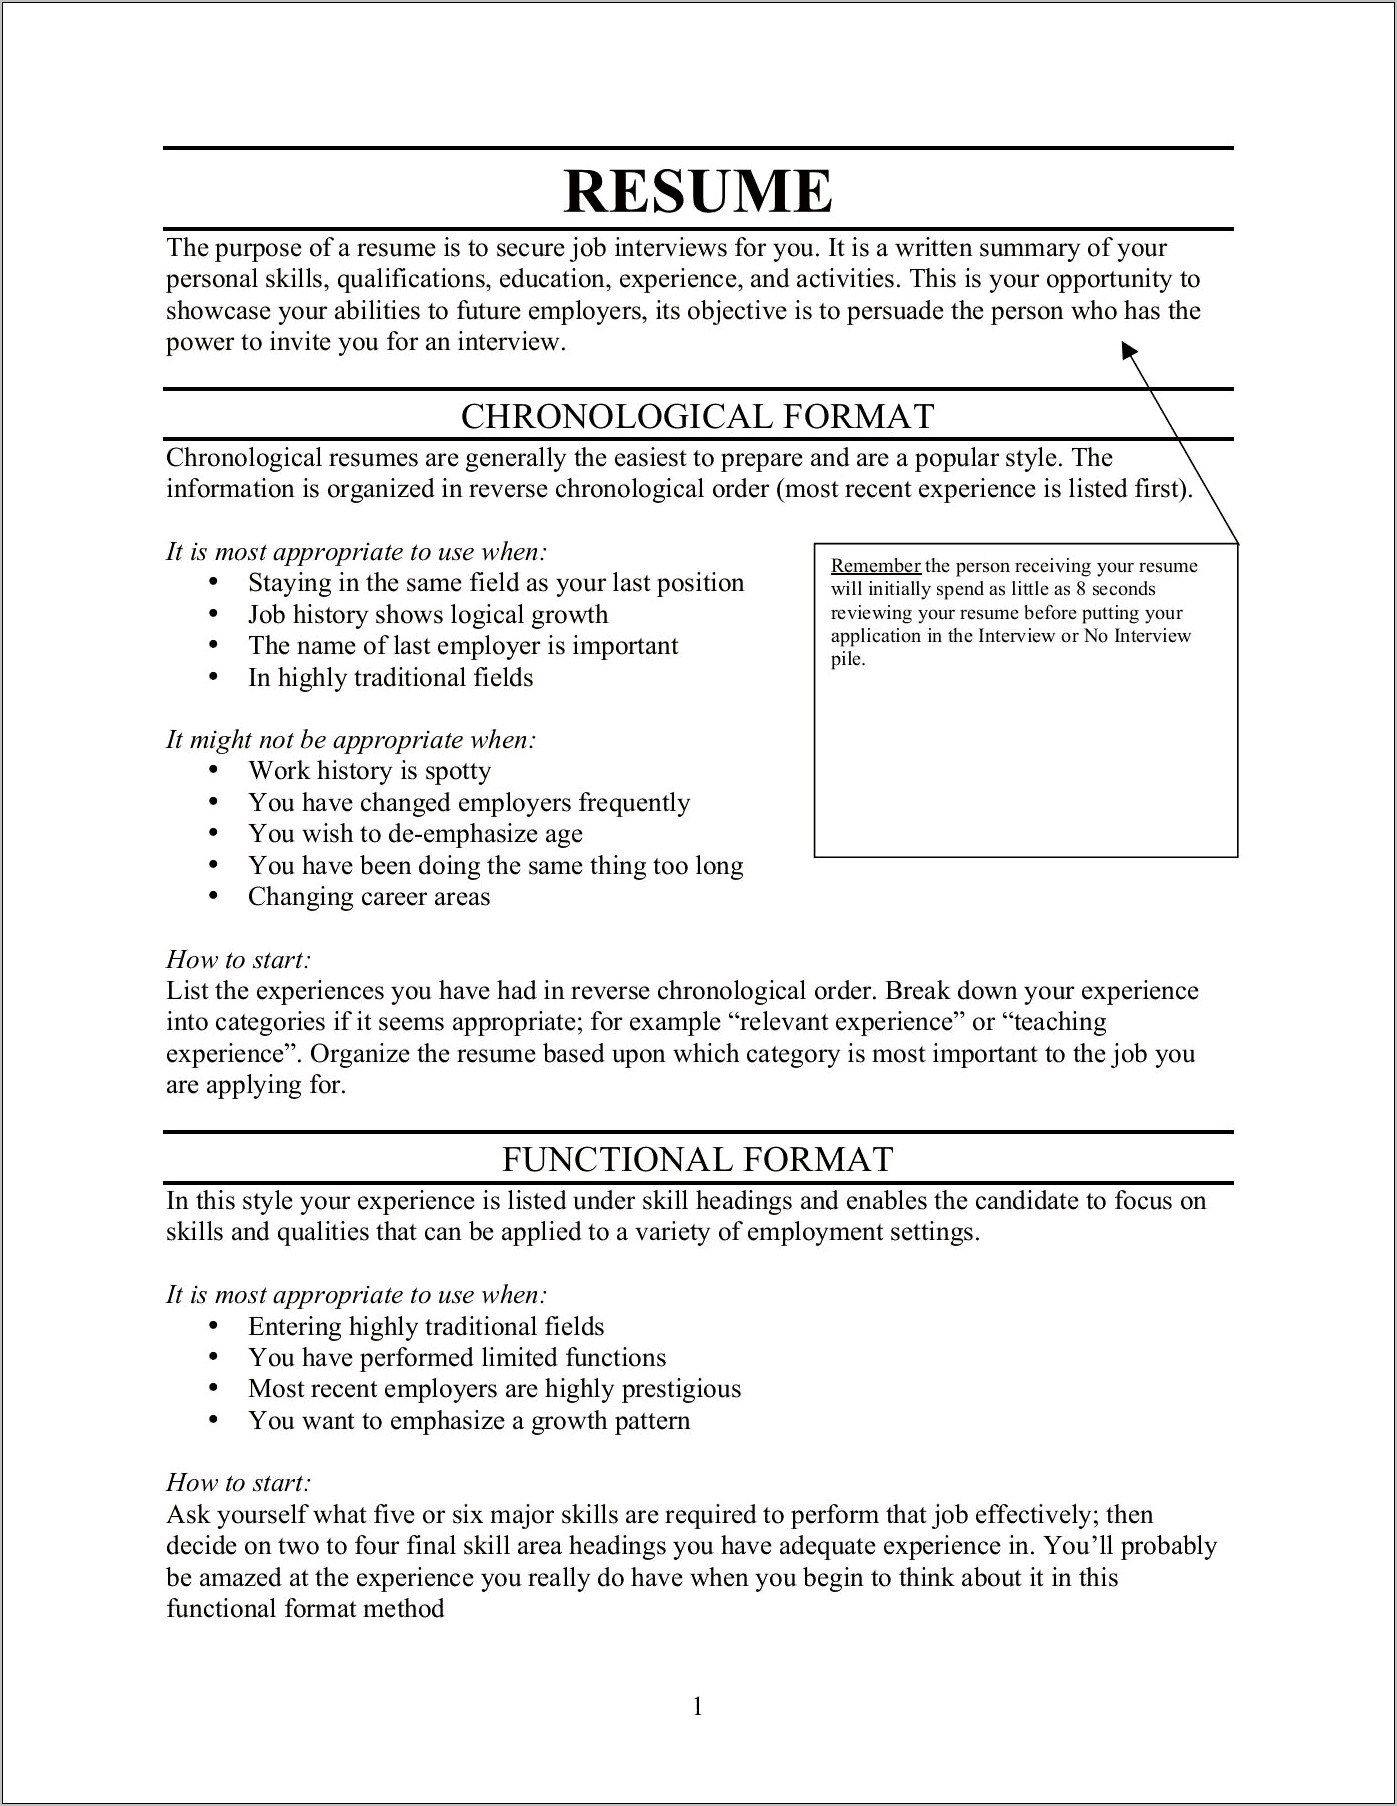 Finding Work With A Spotty Resume